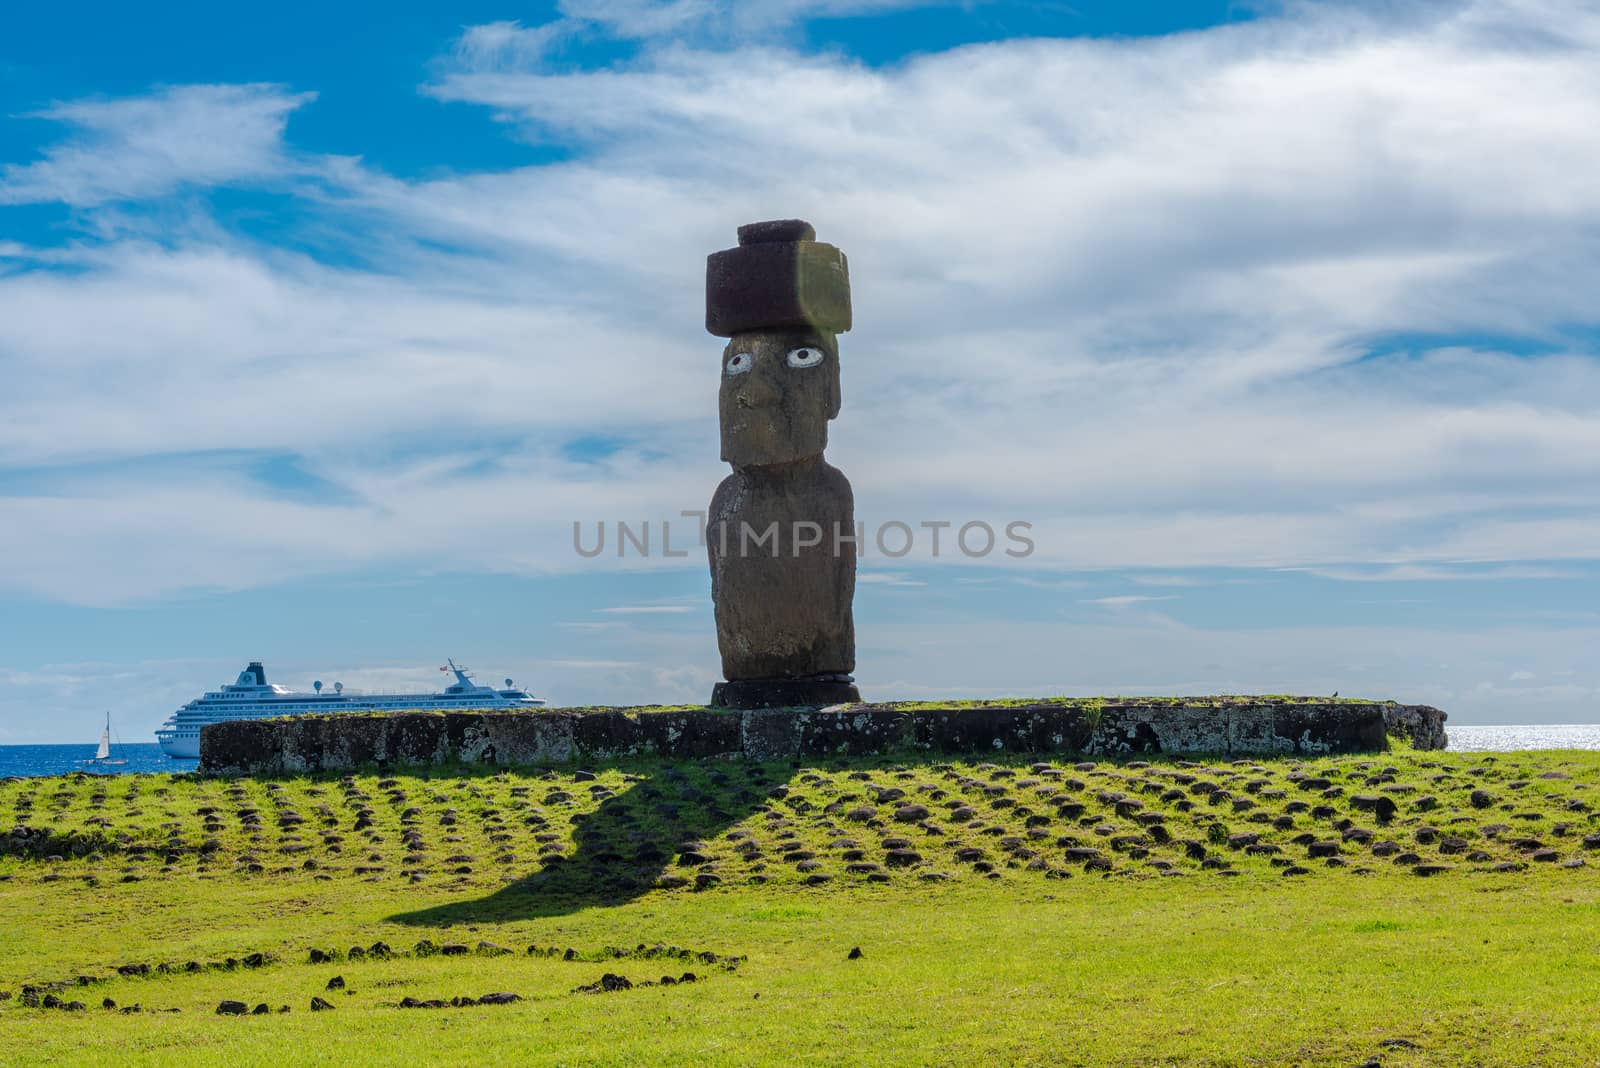 A large Moai statue with open eyes sits on top of an altar. A cruise ship is in the background. Editorial Use Only.